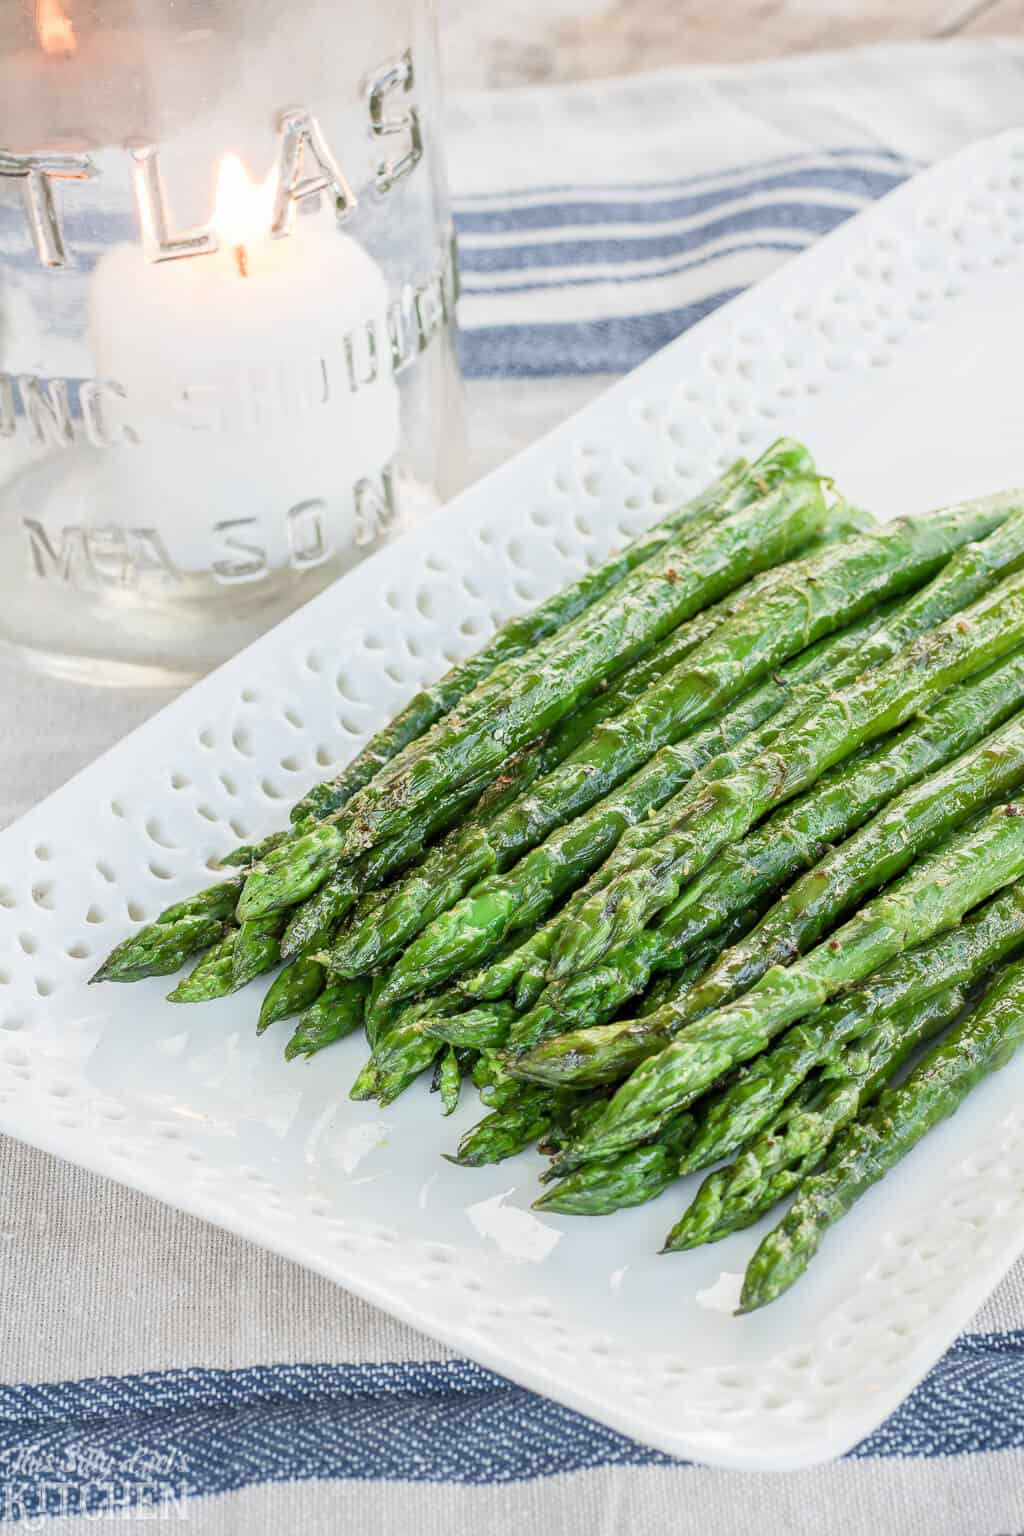 Cooking Asparagus On The Grill
 Easy Grilled Asparagus Recipe Ready in Under 15 Minutes